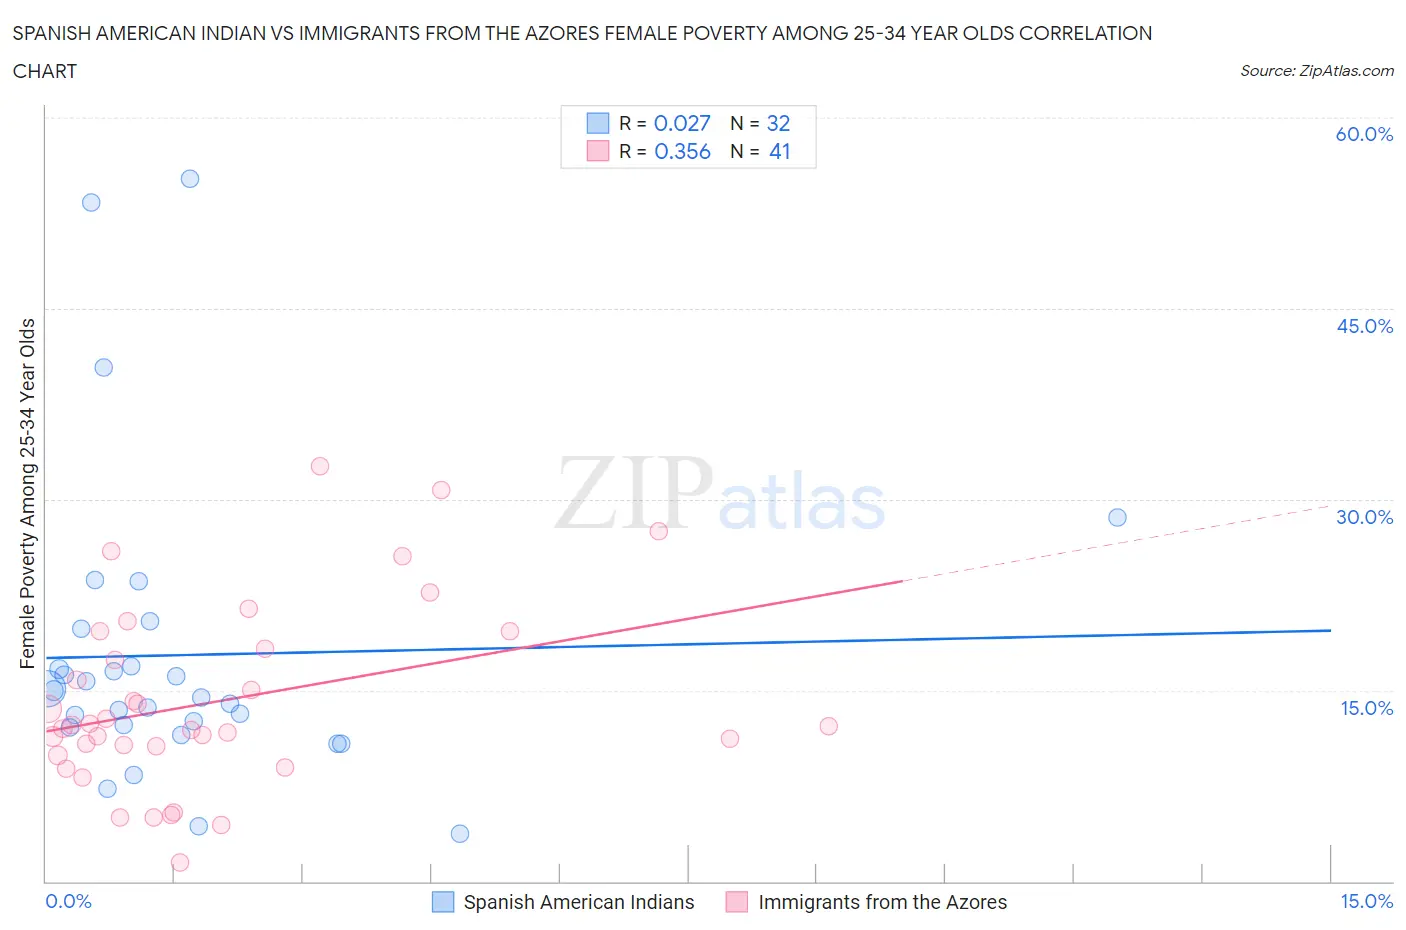 Spanish American Indian vs Immigrants from the Azores Female Poverty Among 25-34 Year Olds